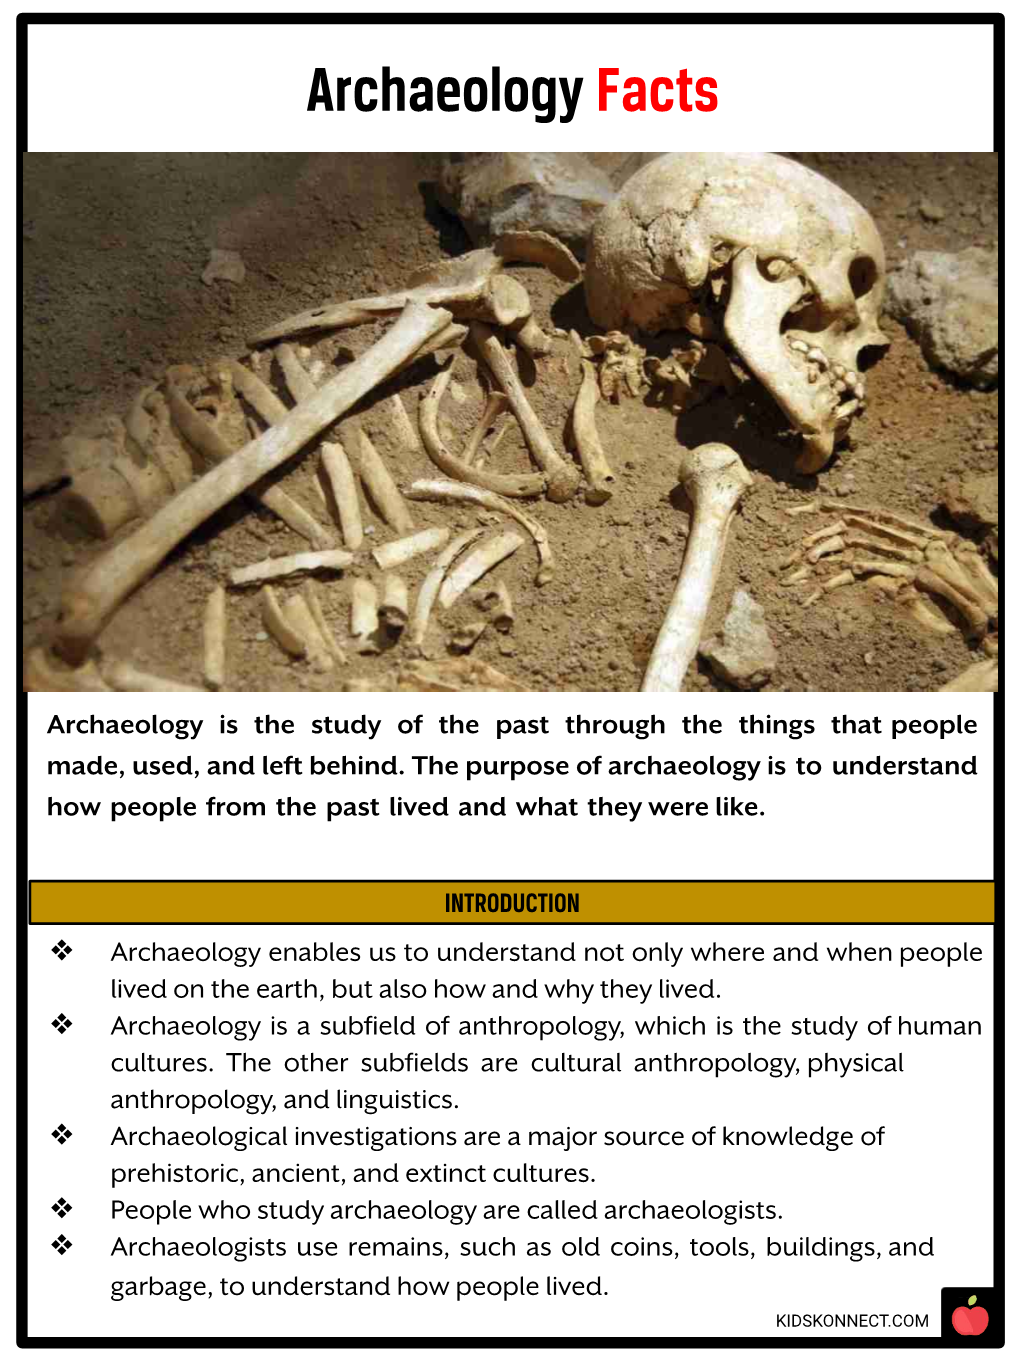 Archaeology Facts